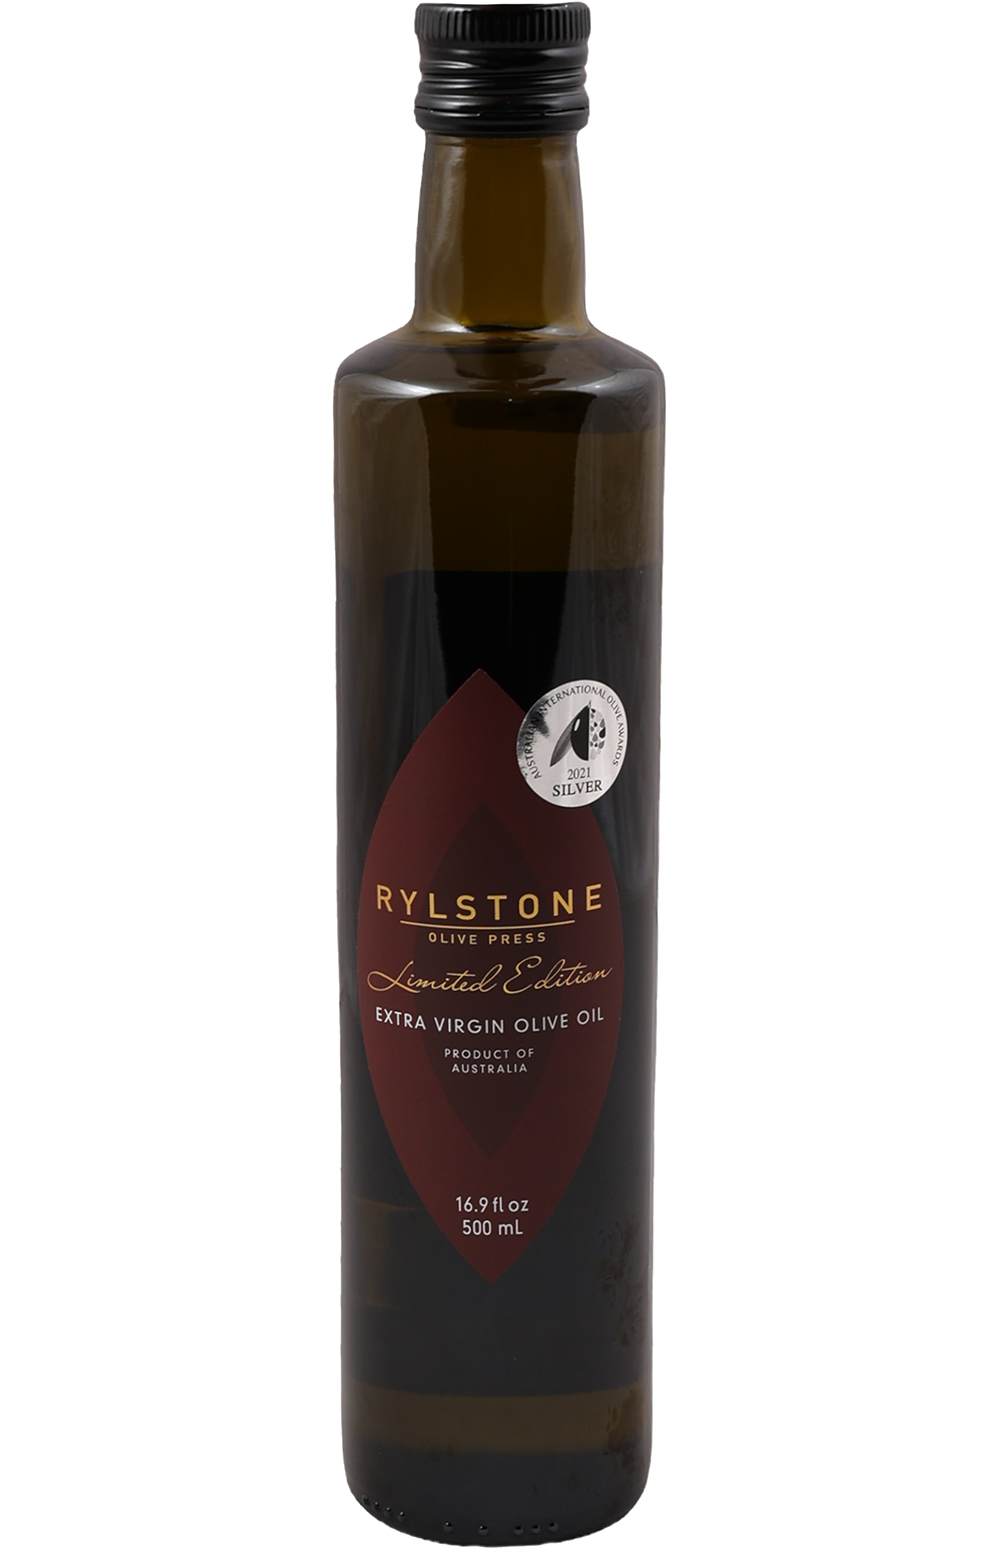 Rylstone Olive Press Limited Edition EVOO